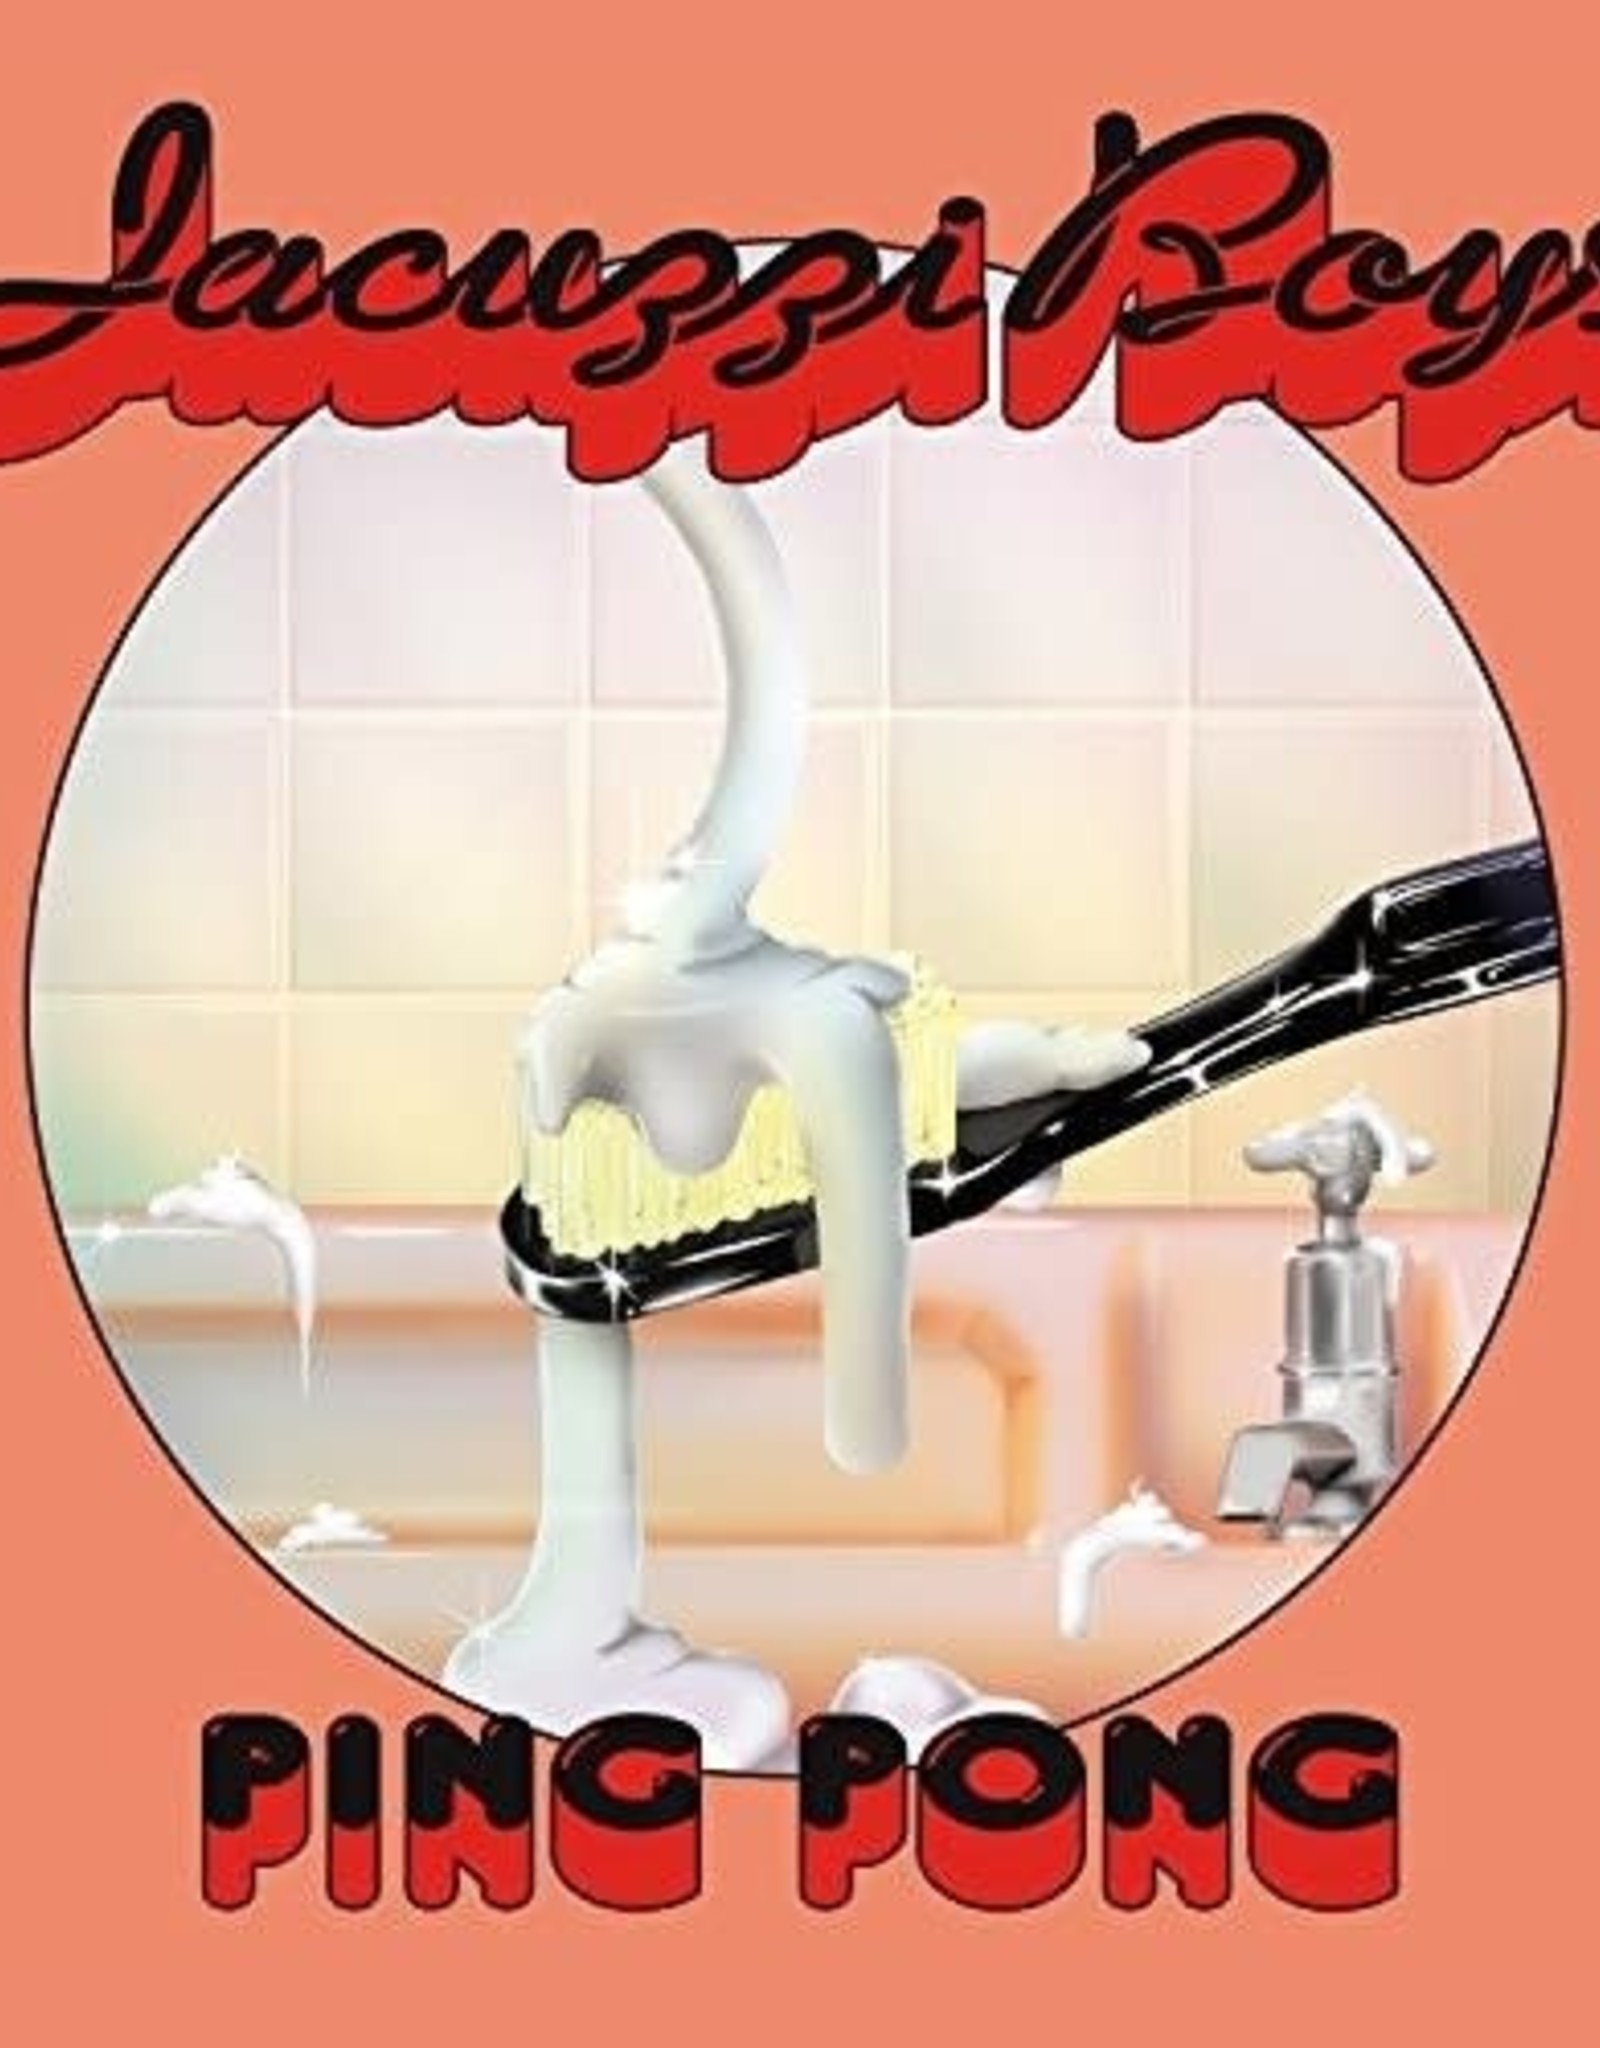 Jacuzzi Boys – Ping Pong